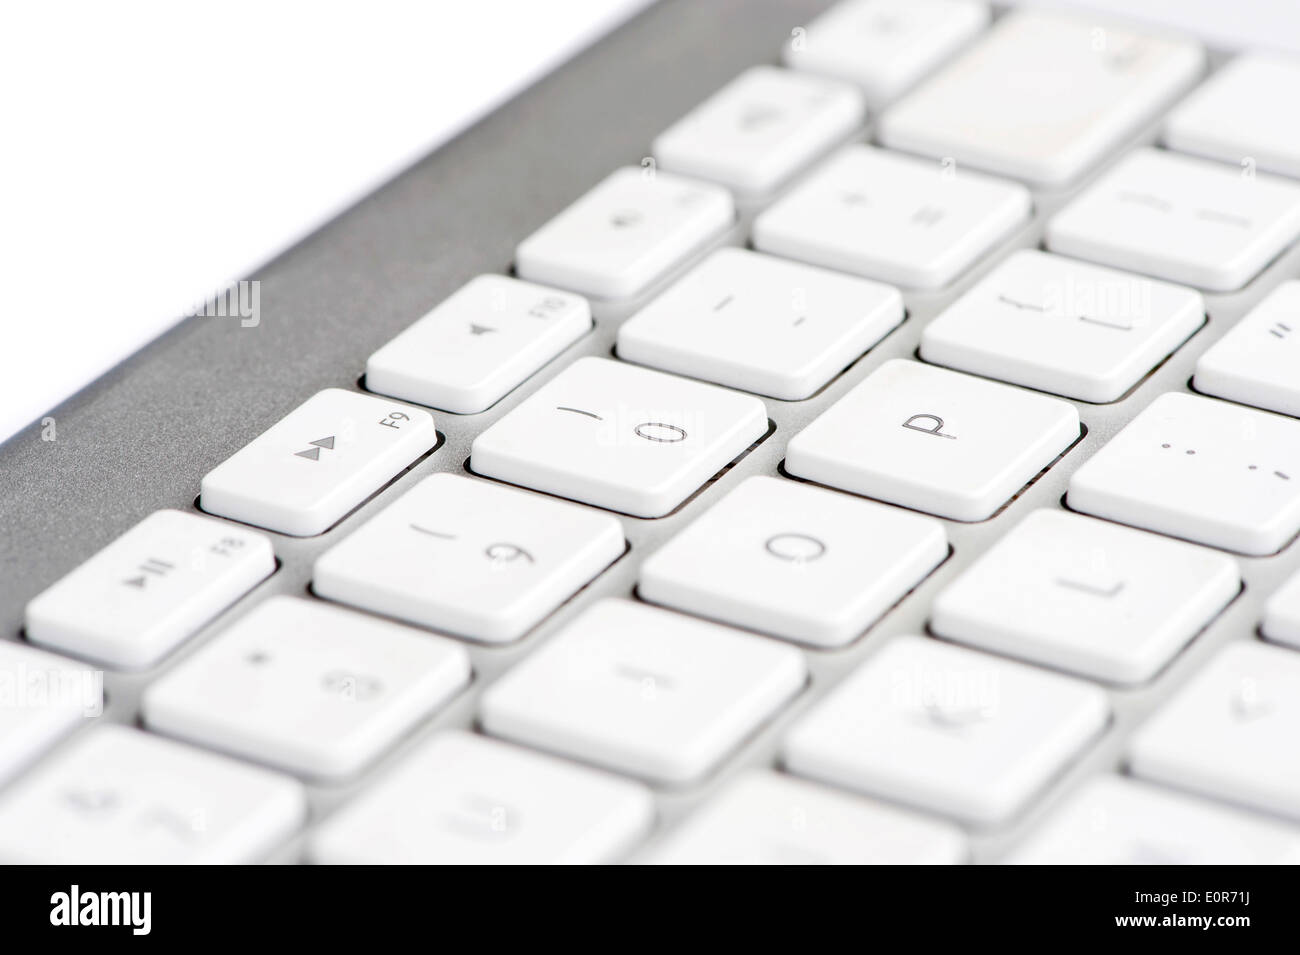 Apple mac white Keyboard focused on the number 0 Stock Photo